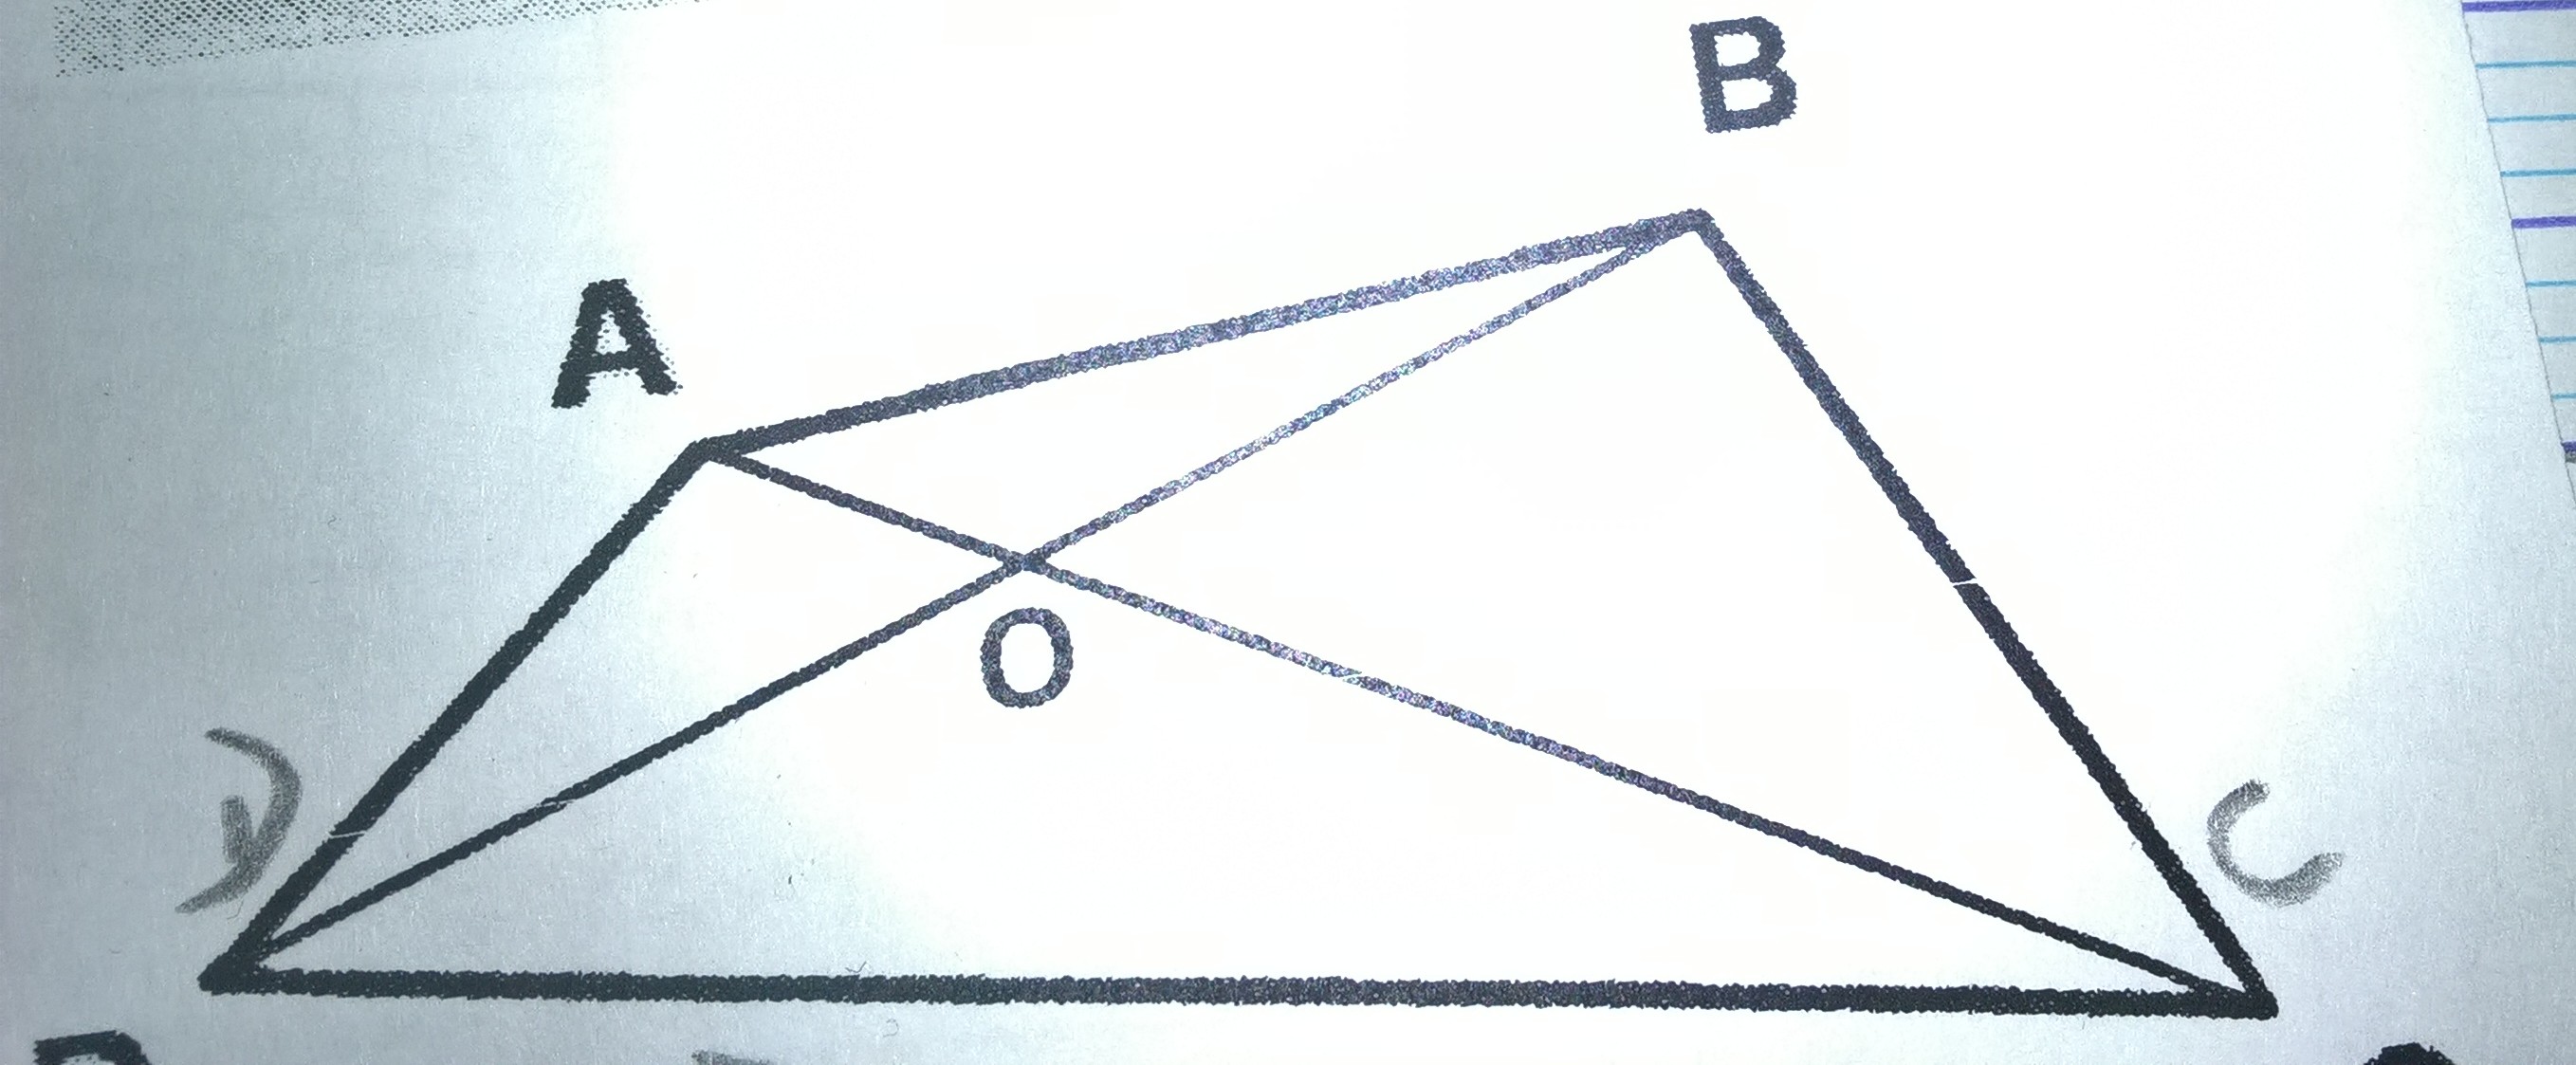 exo 1, question 3